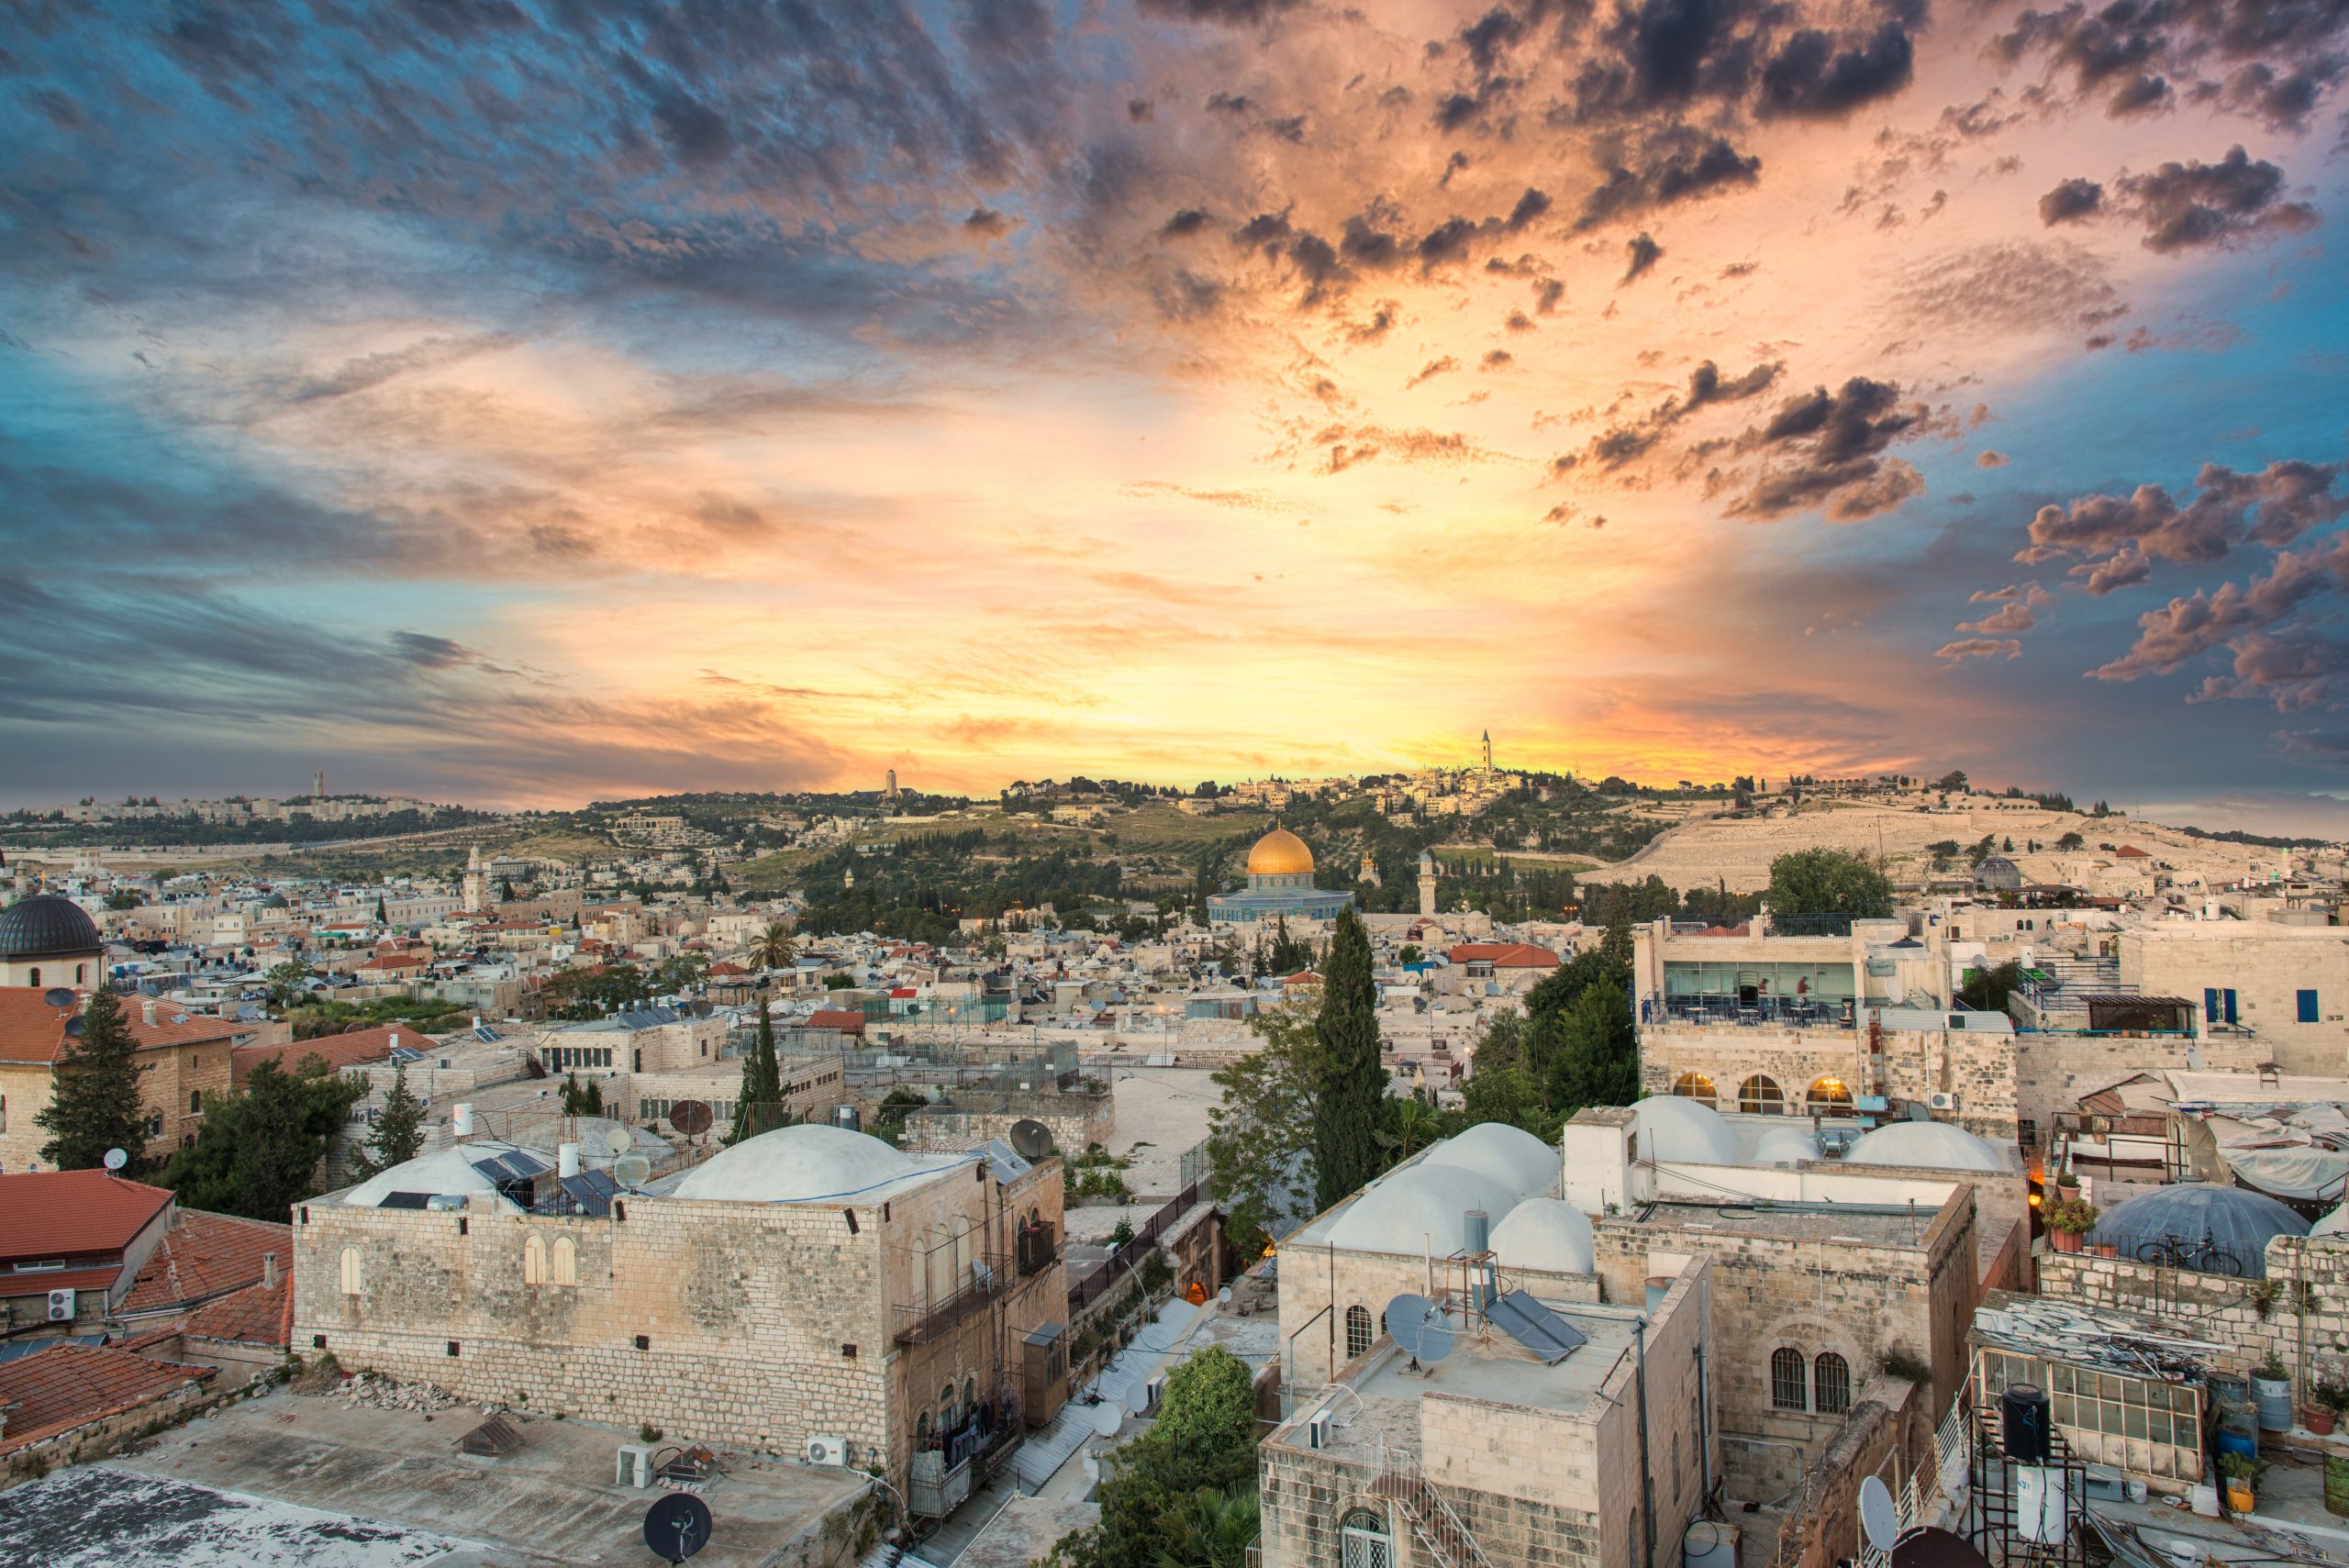 Jerusalem with the dome of the al-Aqsa MosqueMosque and the Mount of Olives